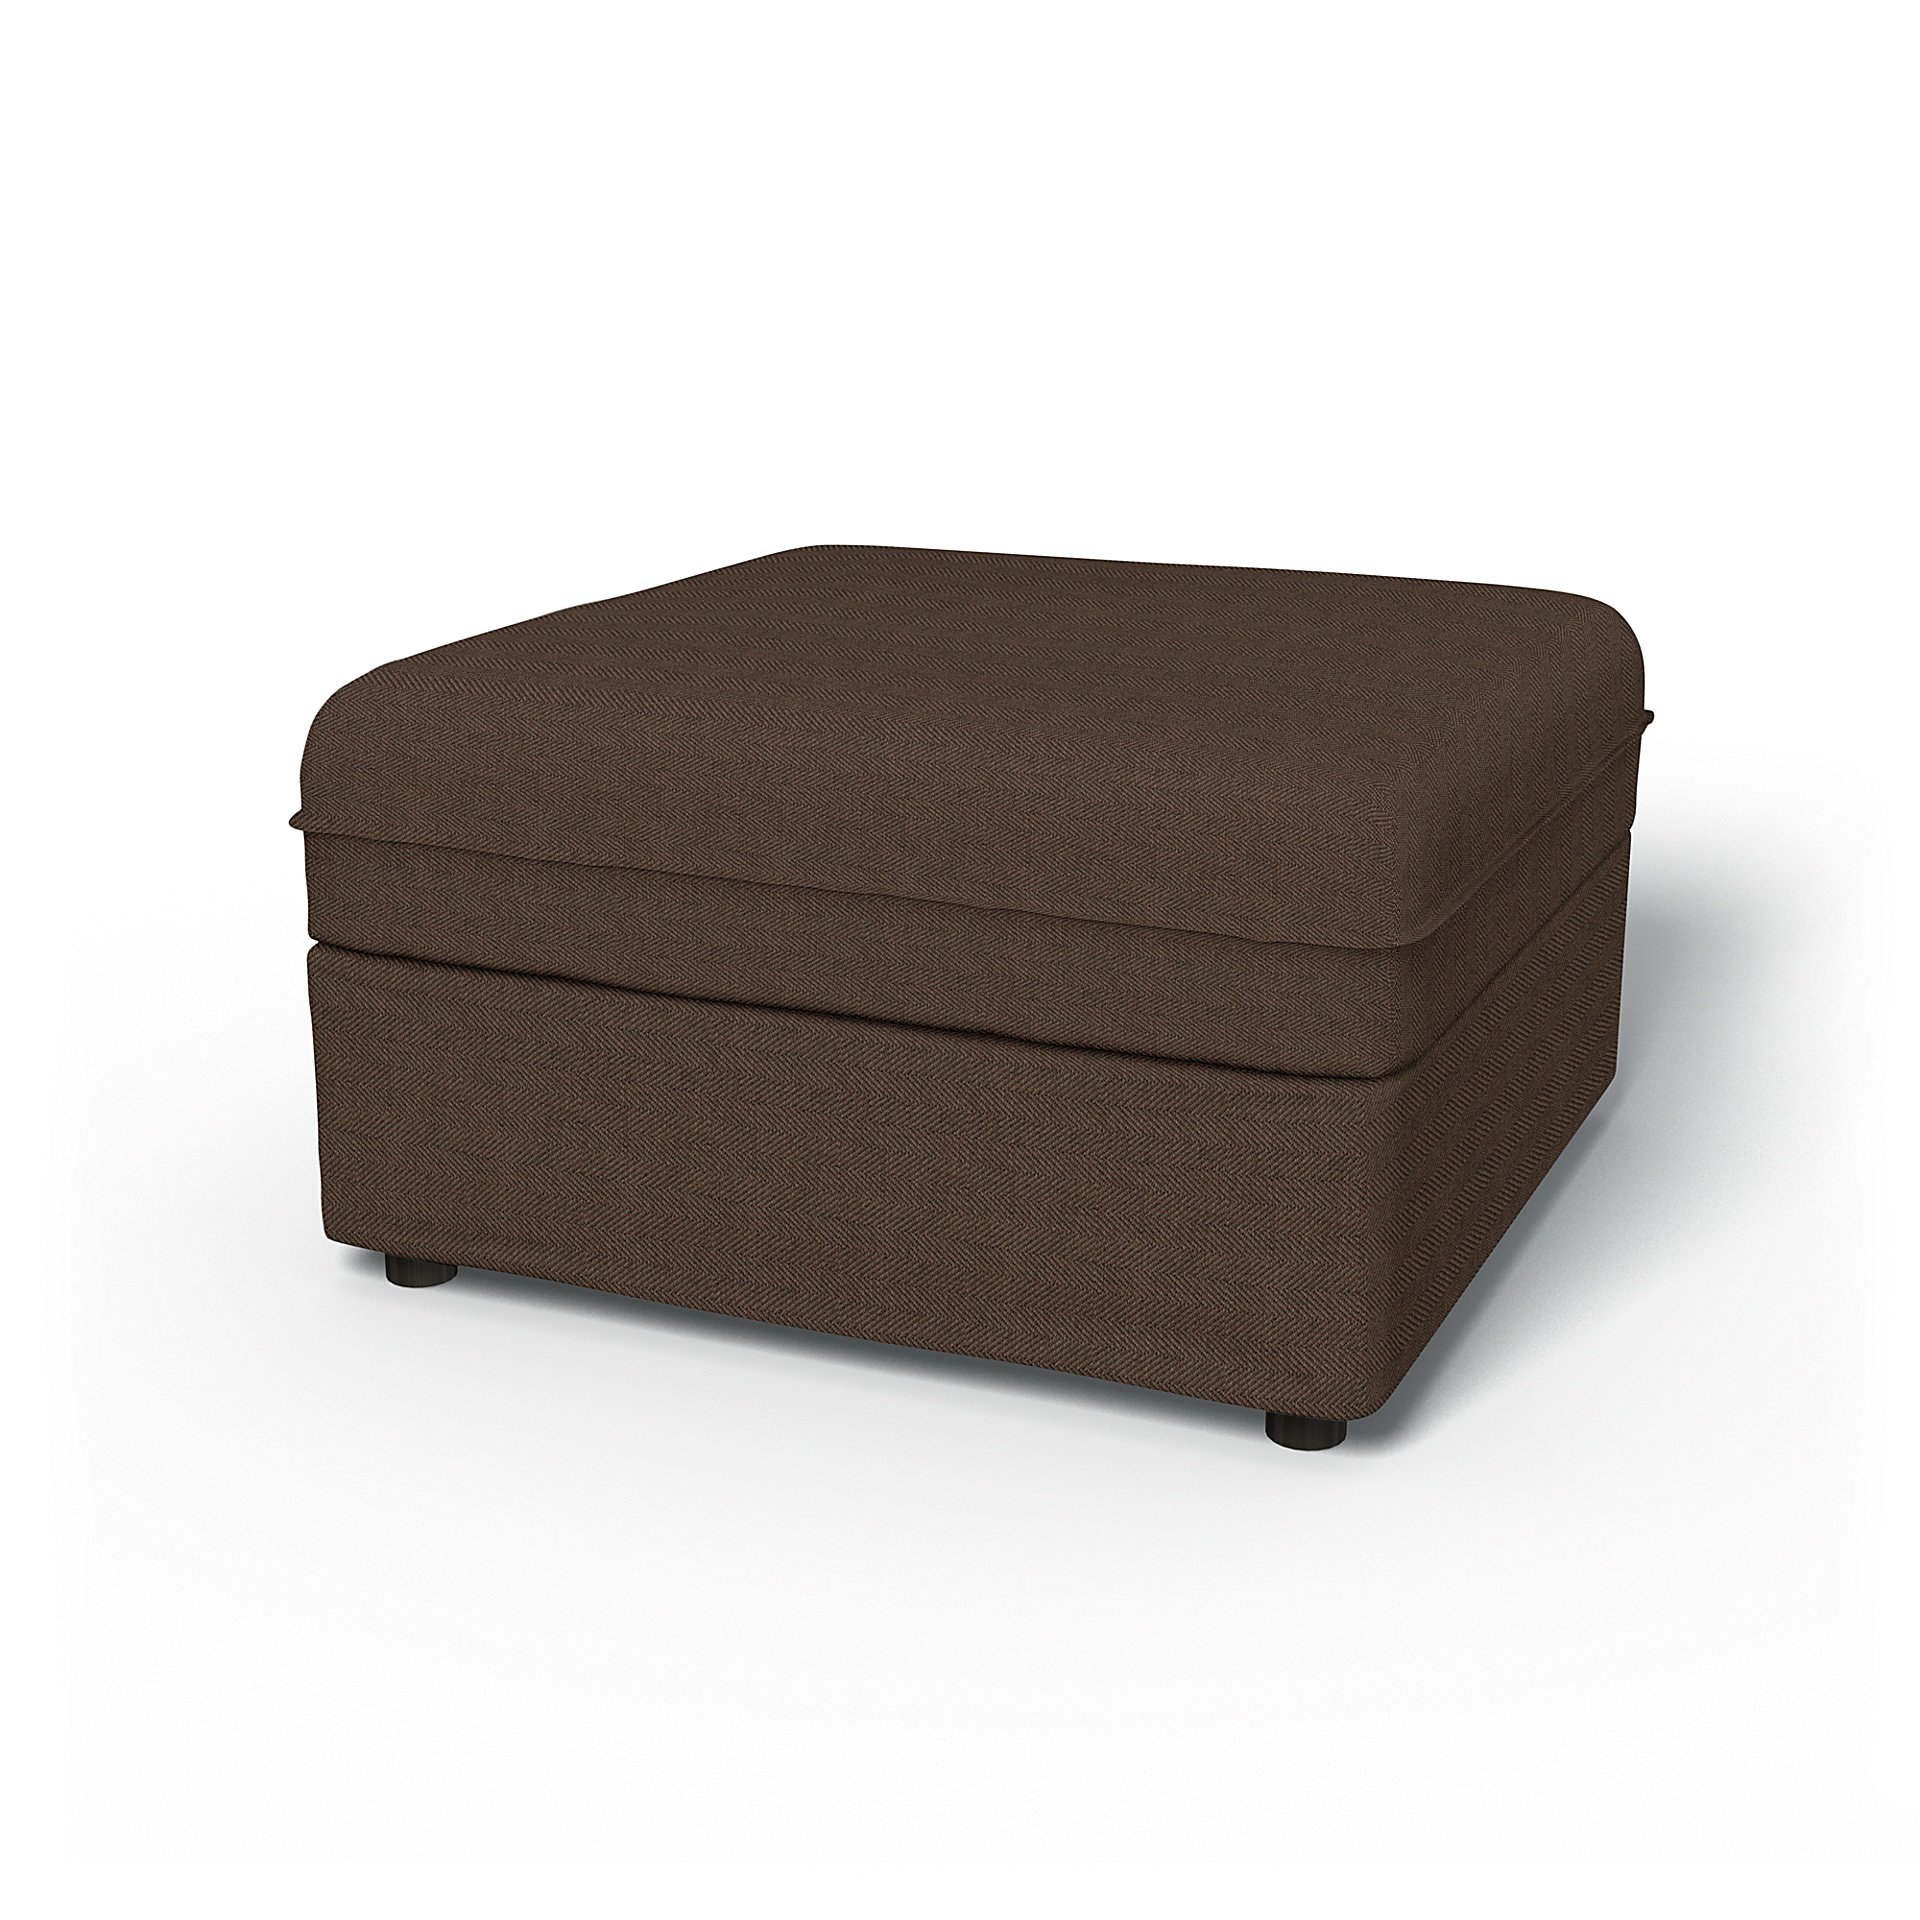 IKEA - Vallentuna Seat Module with Storage Cover 80x80cm 32x32in, Chocolate, Boucle & Texture - Bemz